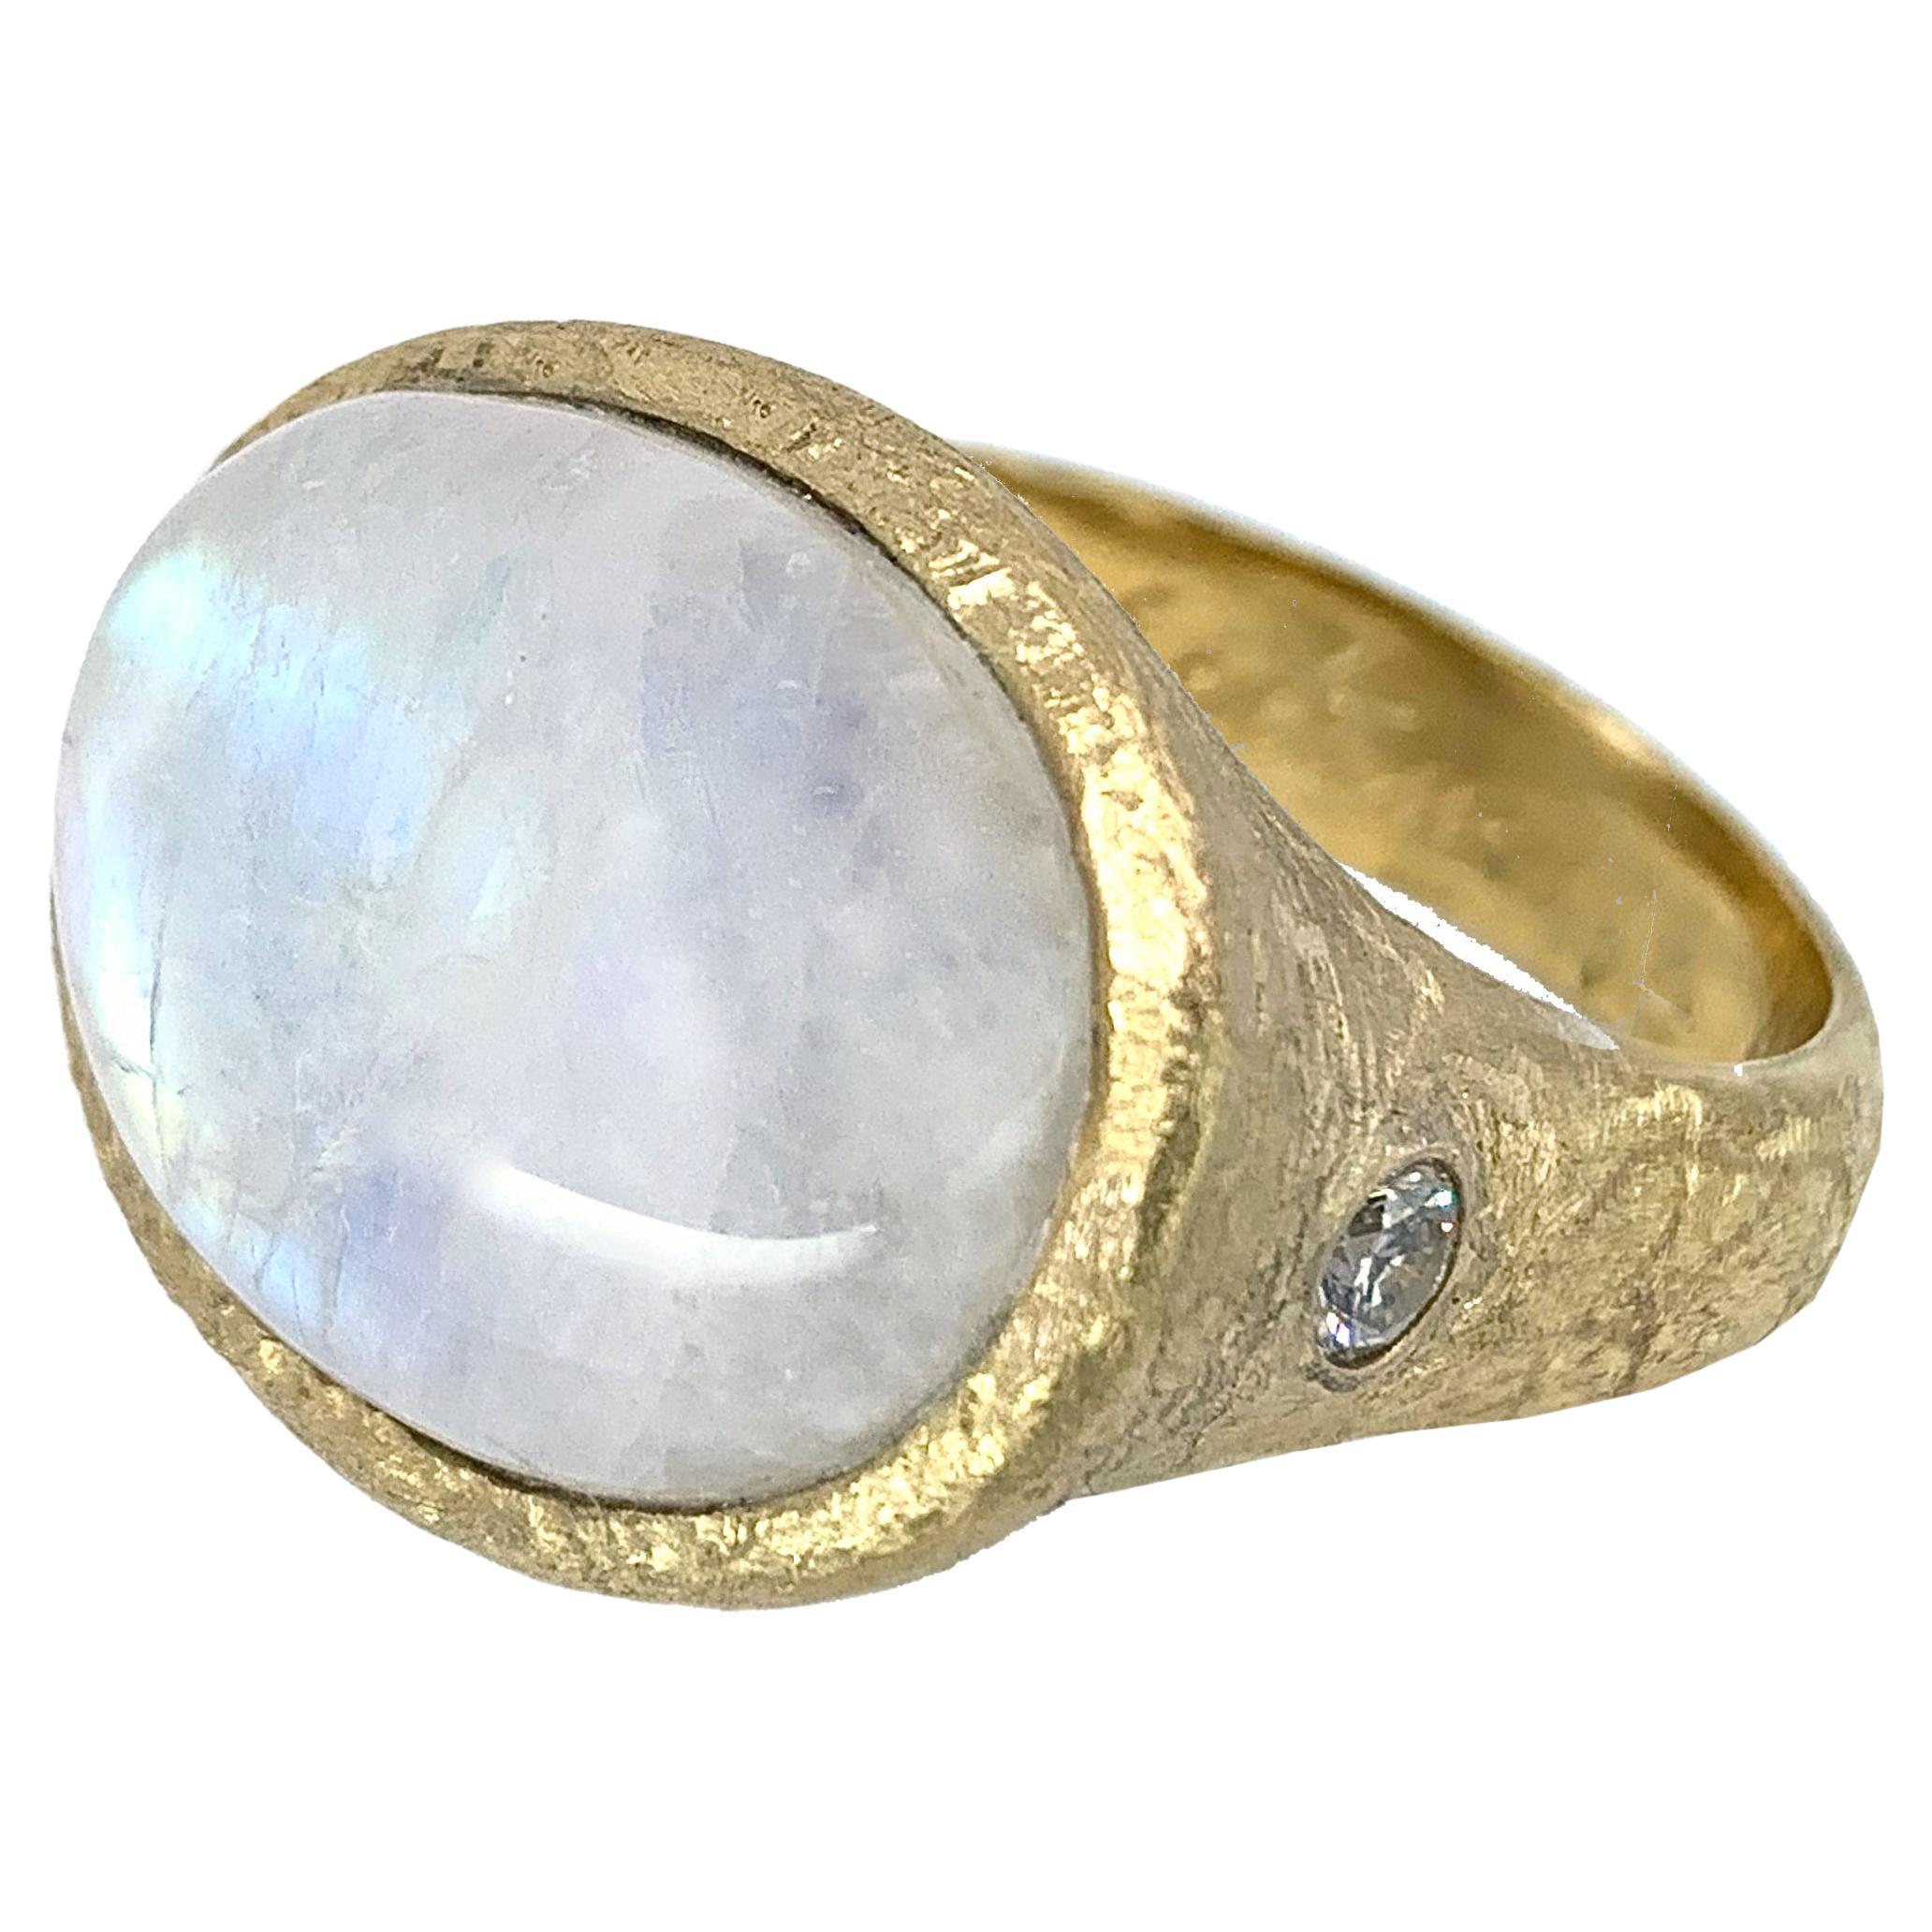 Moonstone "Rice Paper" Ring of Textured 18 Karat Gold with Diamond Accent